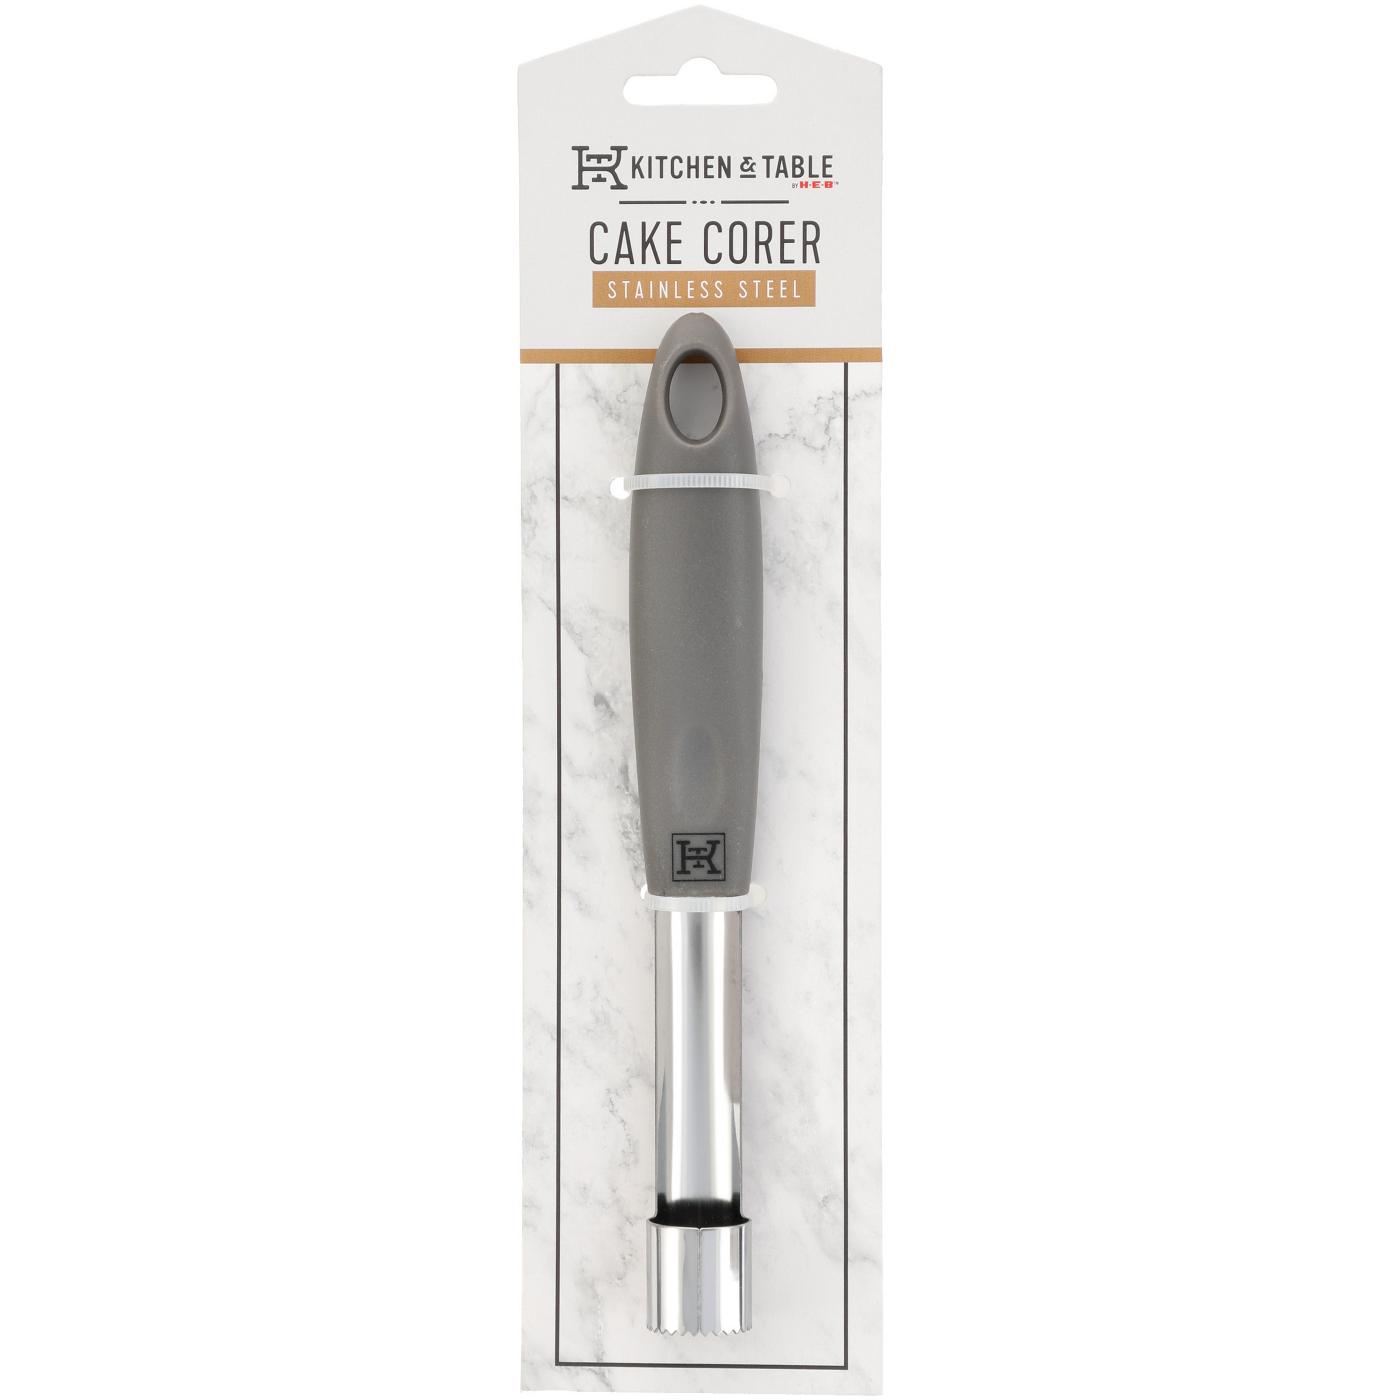 Kitchen & Table by H-E-B Stainless Steel Cake Corer; image 1 of 2